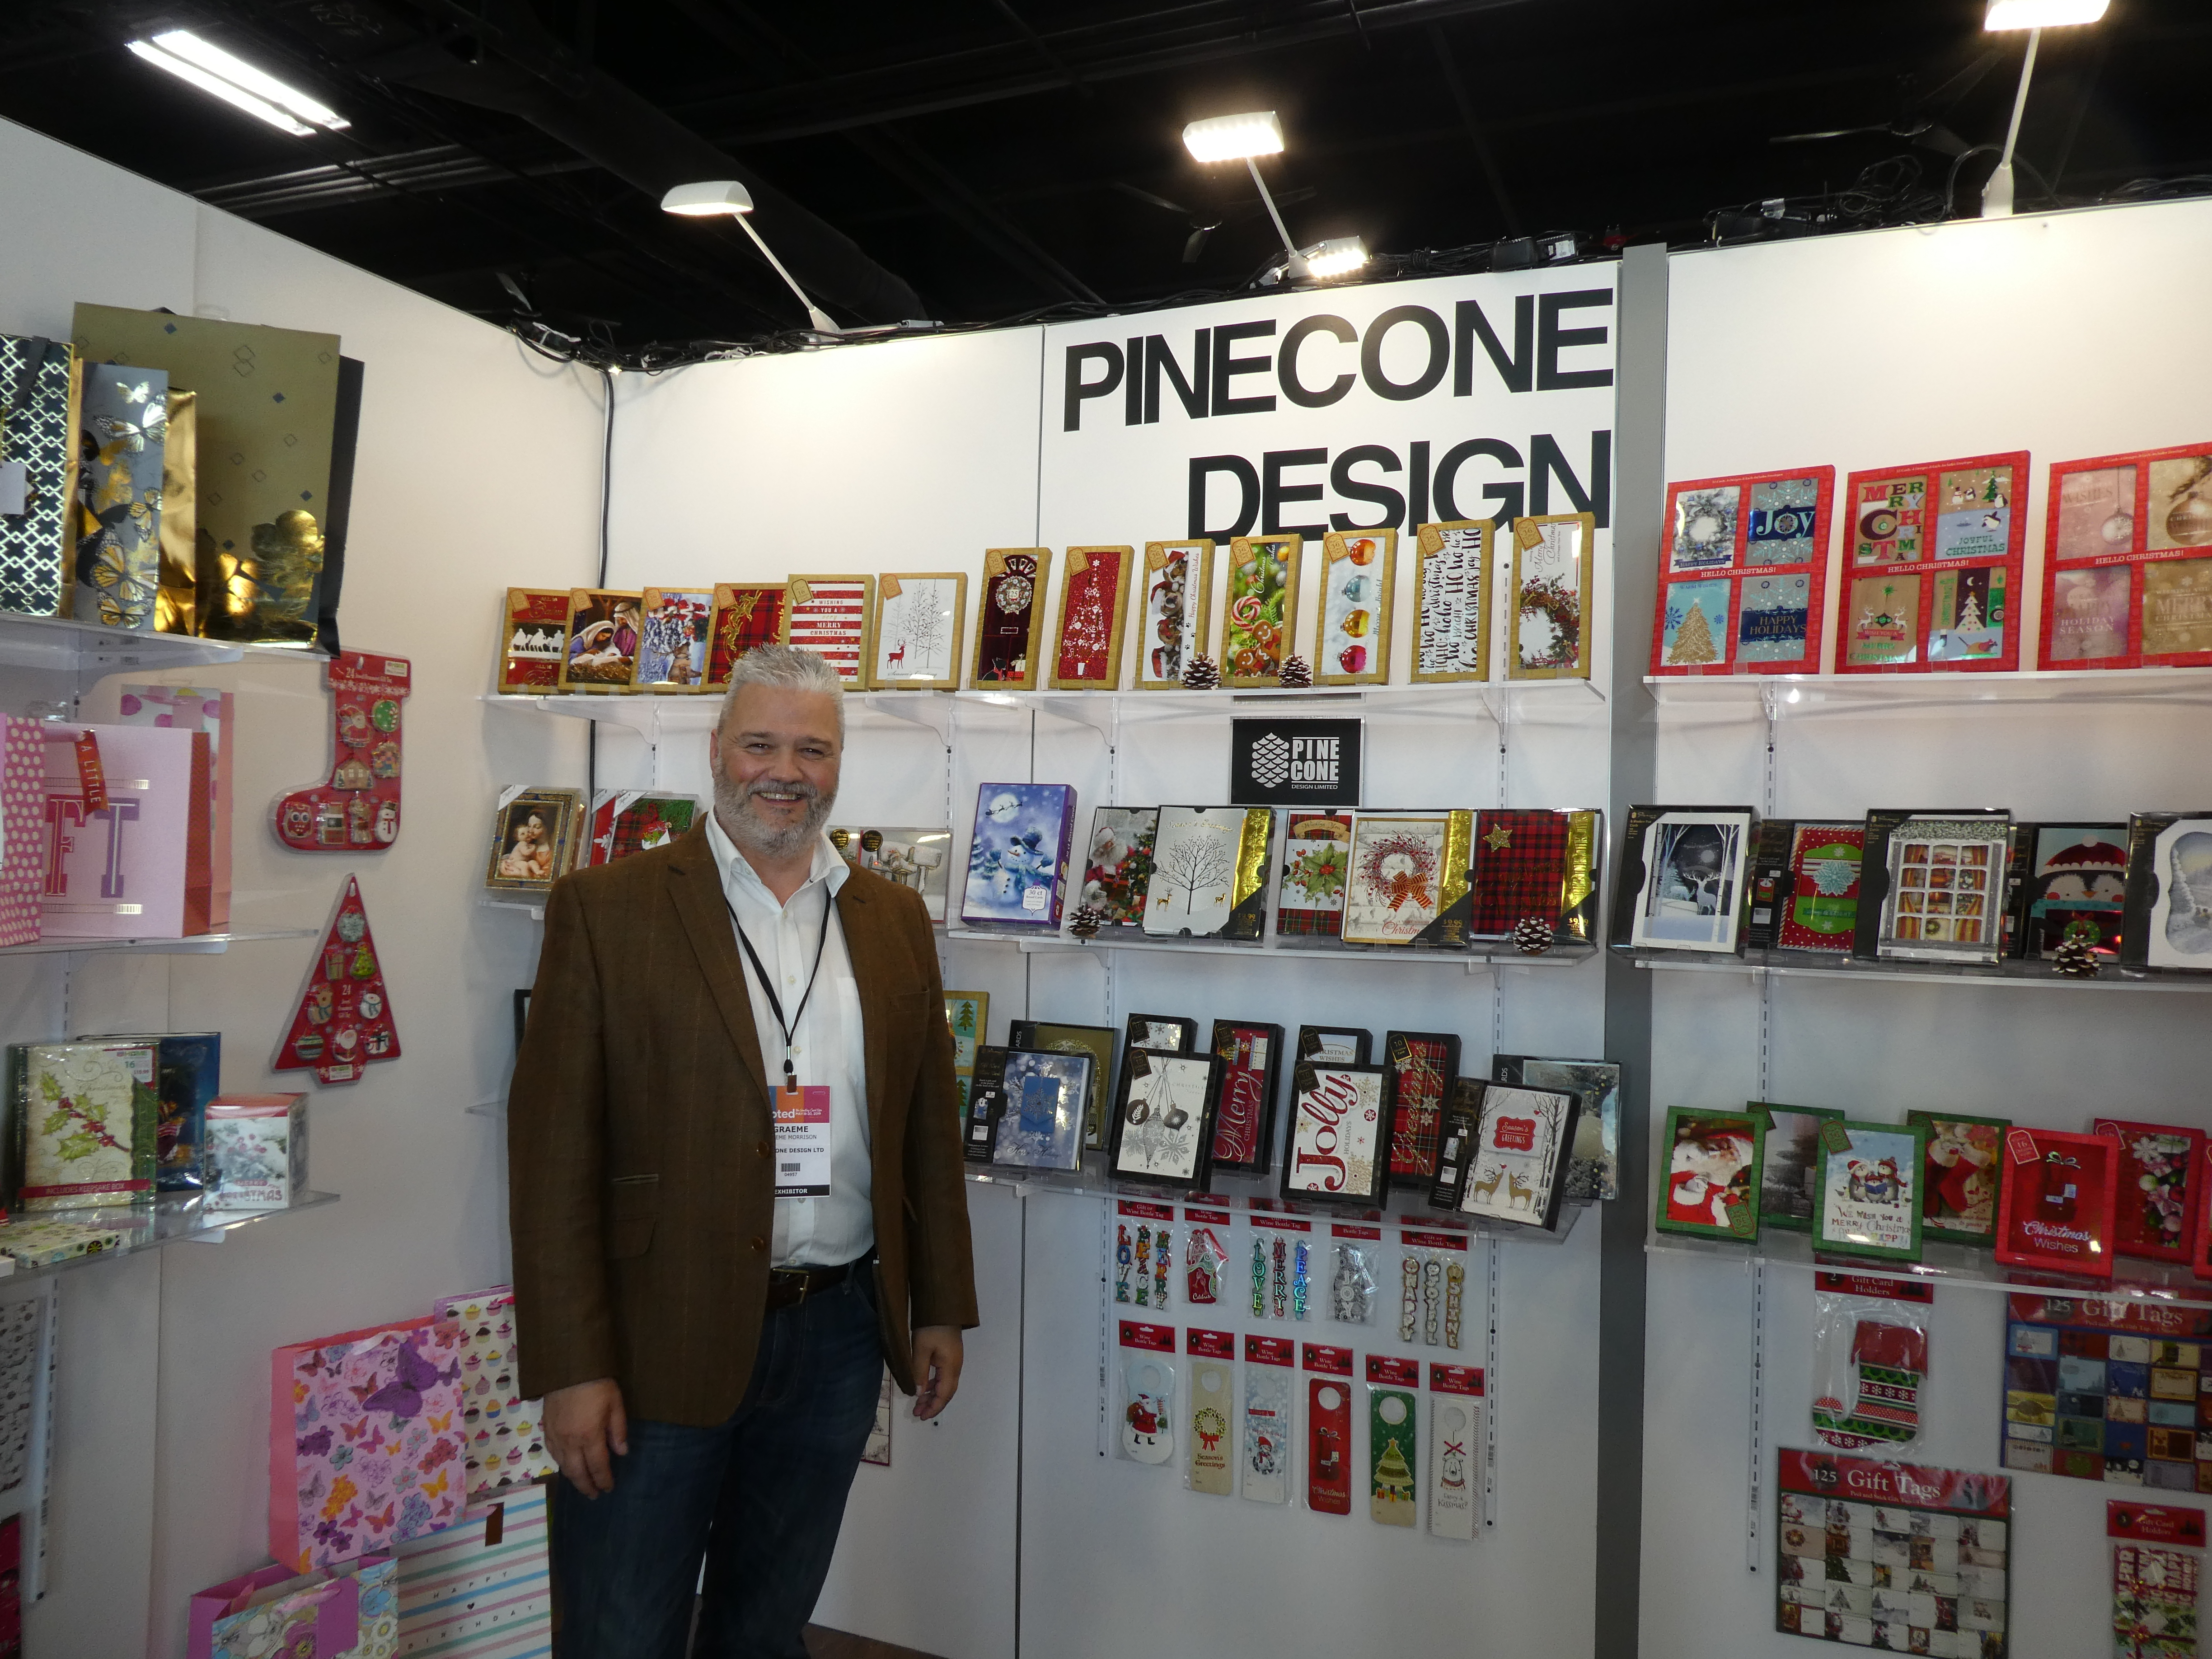 Above: Graeme Morrison, the well known exec for Sandbox (which organises Far East production for many UK publishers), was at Noted with its US Pinecone Design company’s stand sharing advice on the tariffs. 